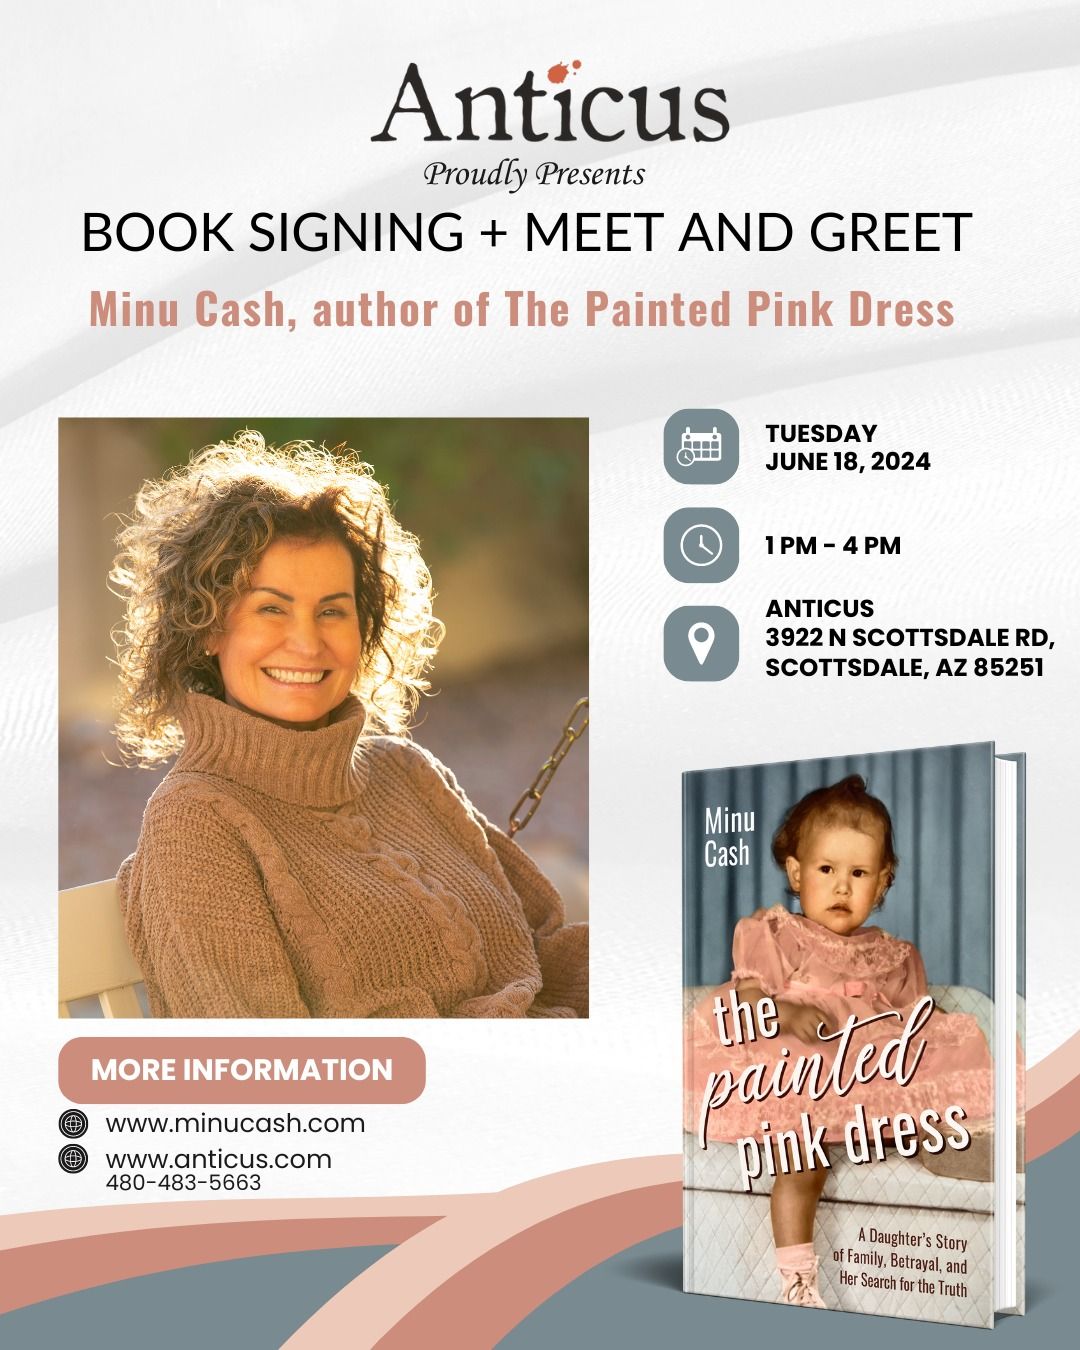 Author Book Signing + Meet and Greet